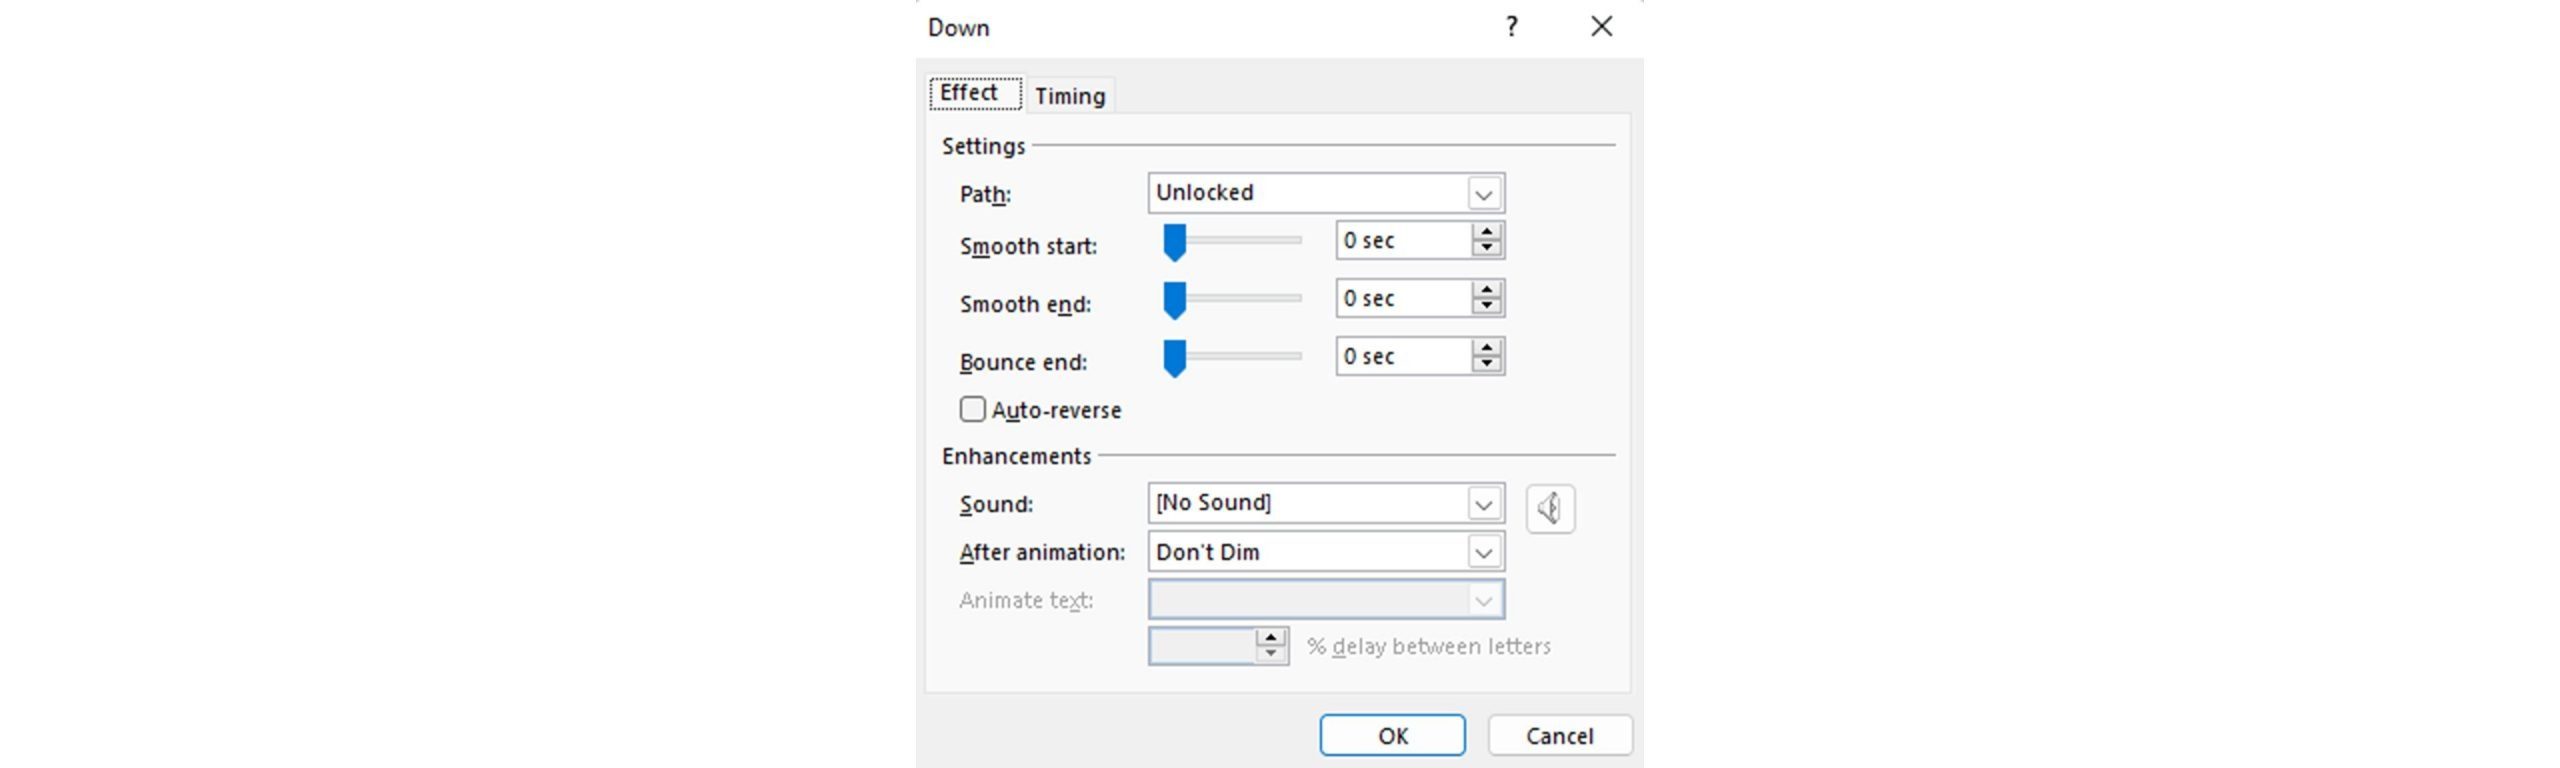 Effect options pop up for animation showing sliders for smooth start and smooth end to the very left of the scale.